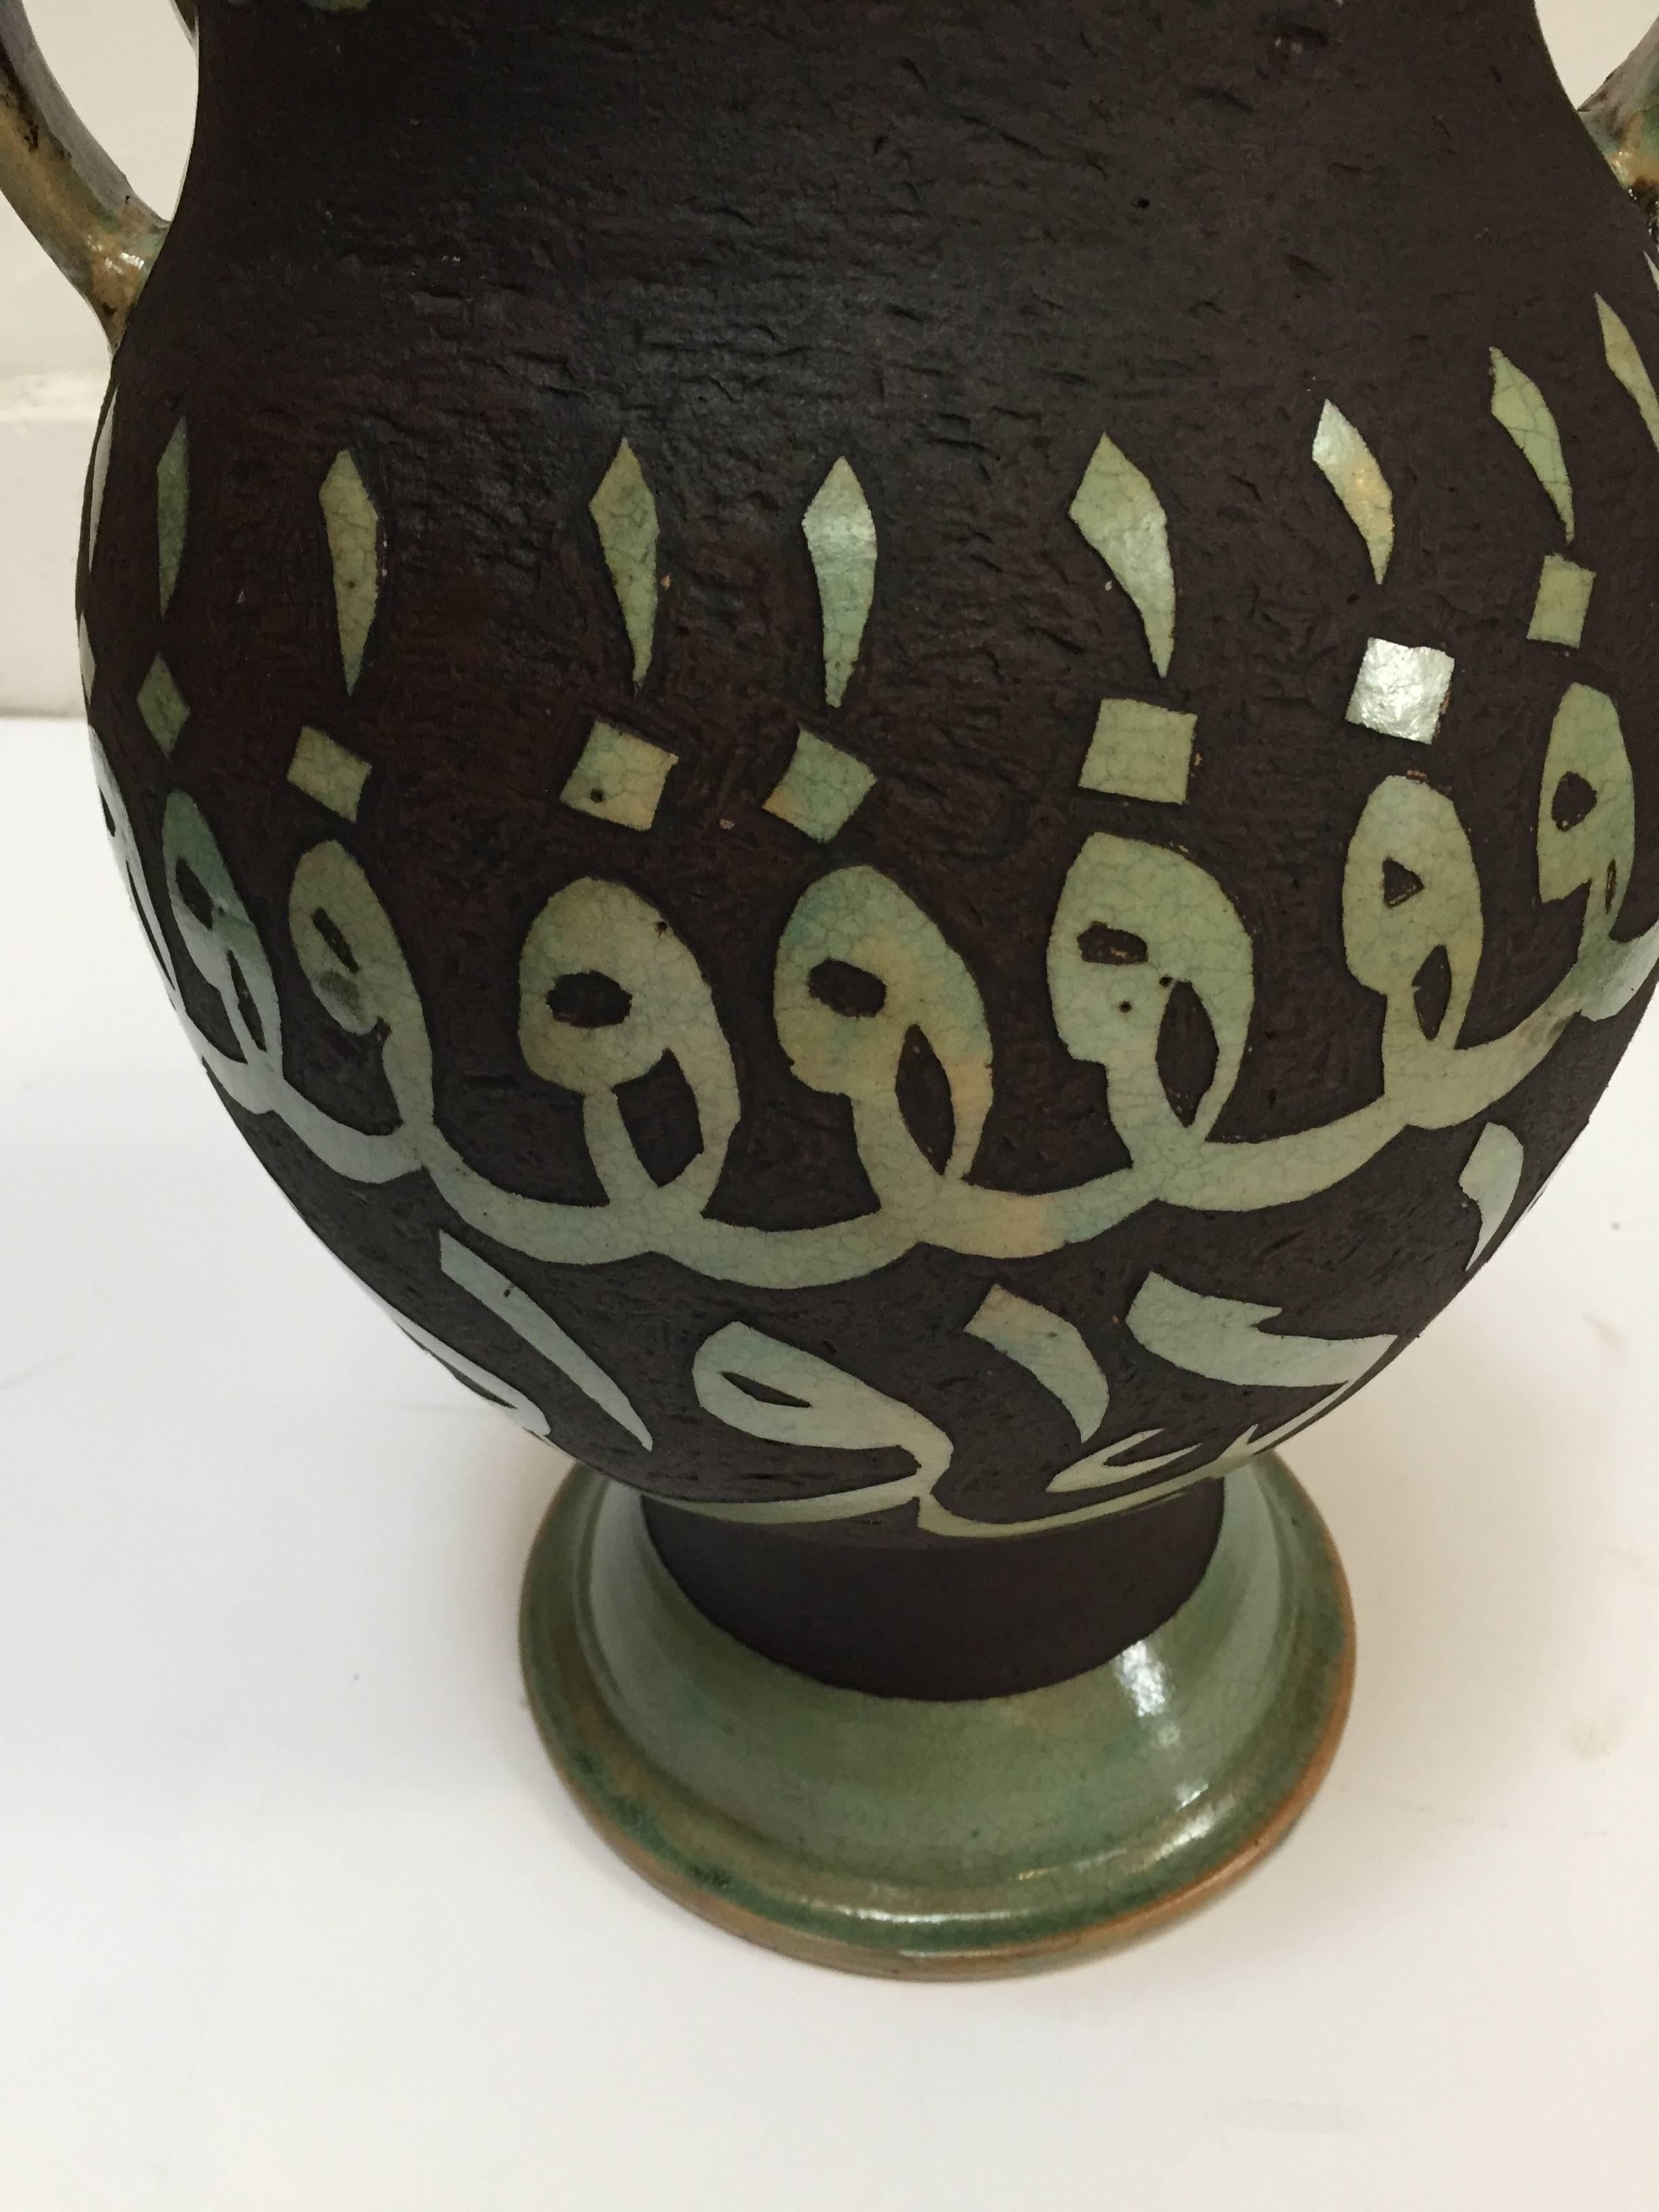 Pair of Green Moroccan Ceramic Vases with Chiseled Arabic Calligraphy Writing In Good Condition For Sale In North Hollywood, CA